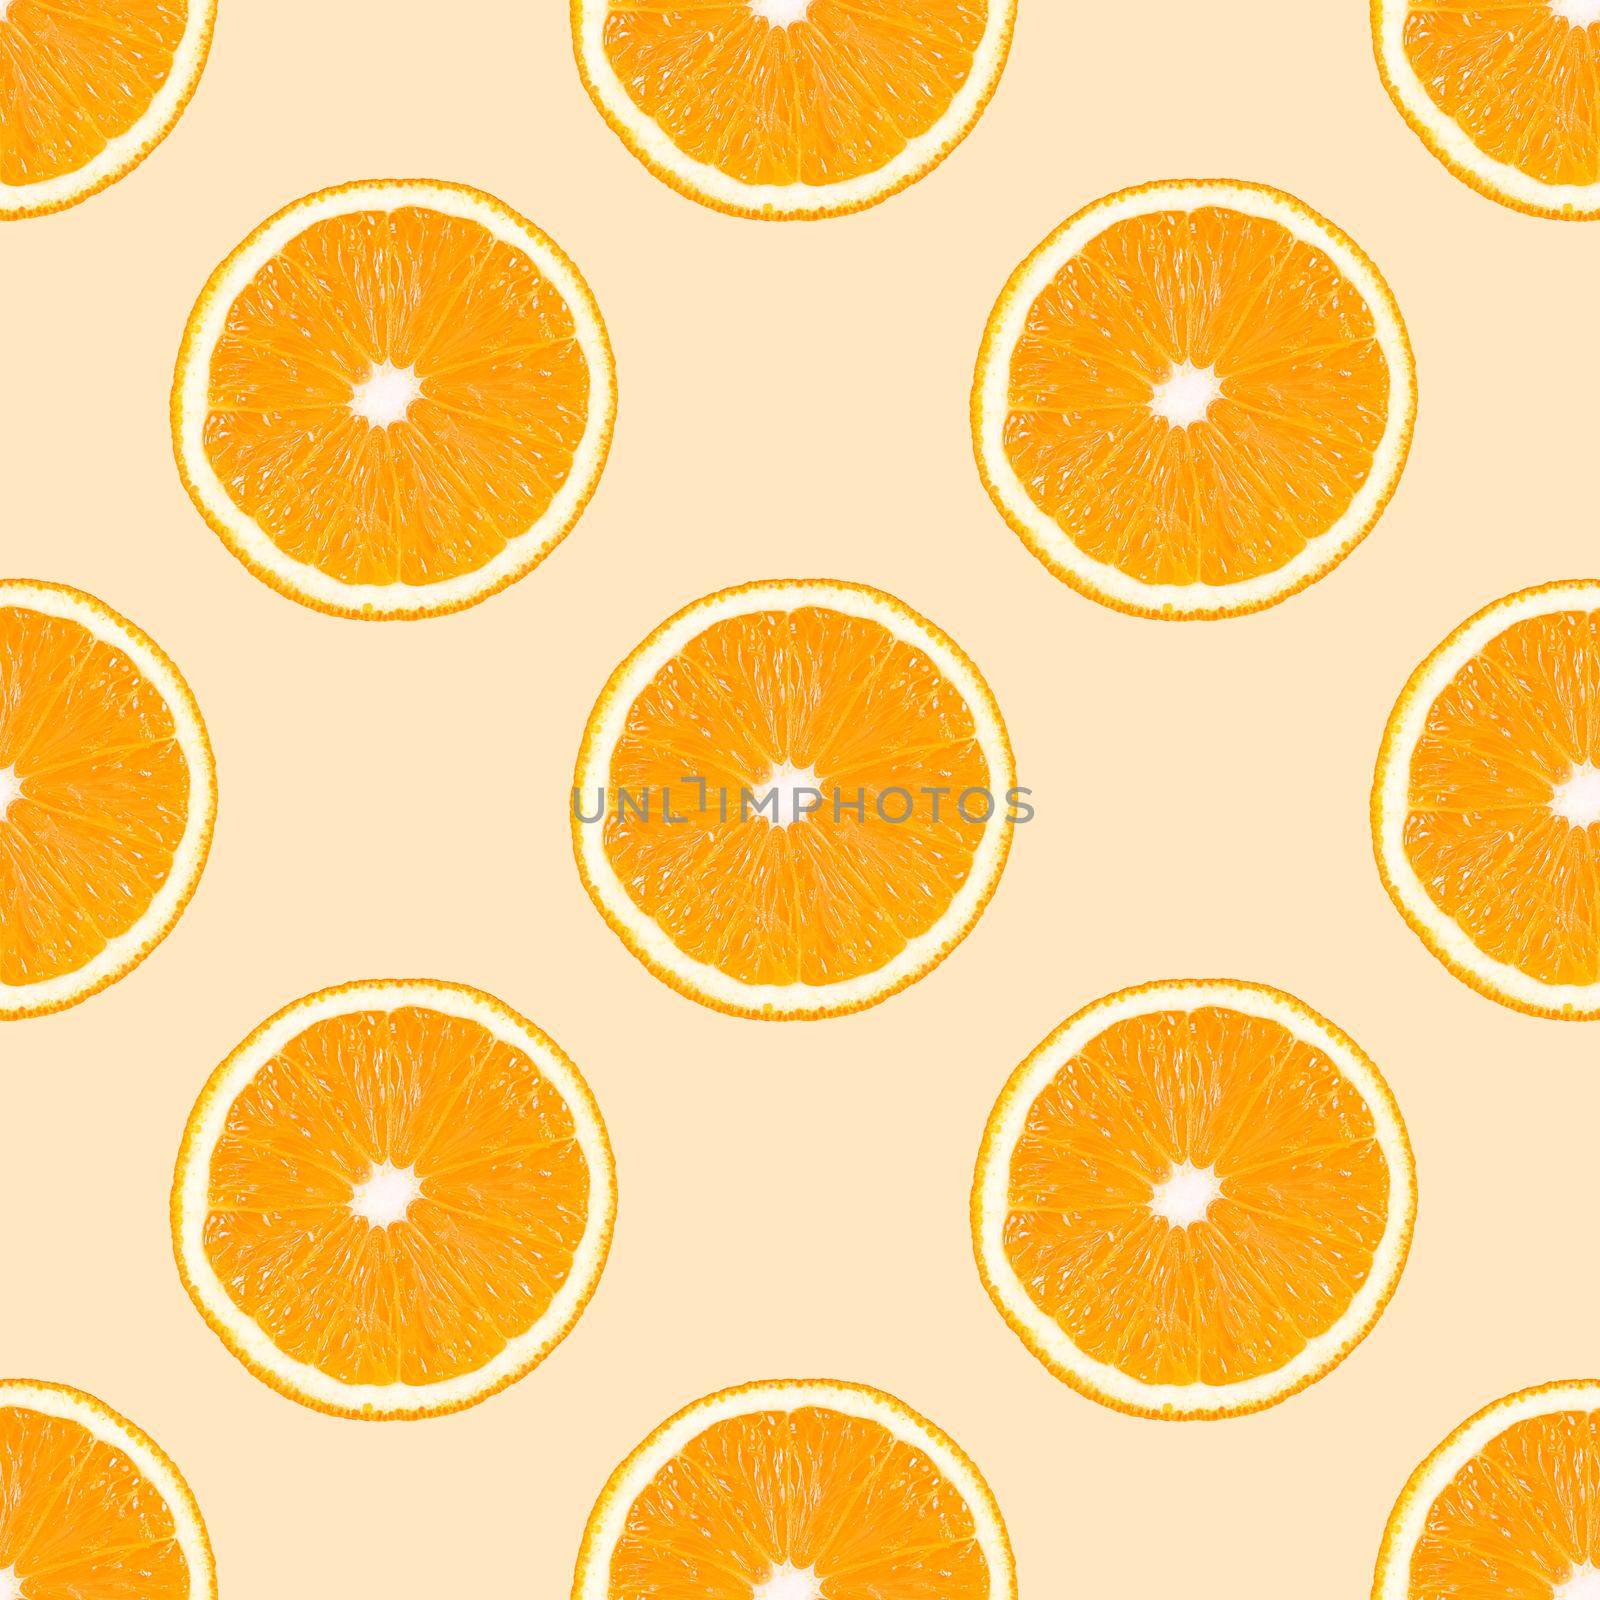 Seamless pattern made from orange fruit slices on a beige background.